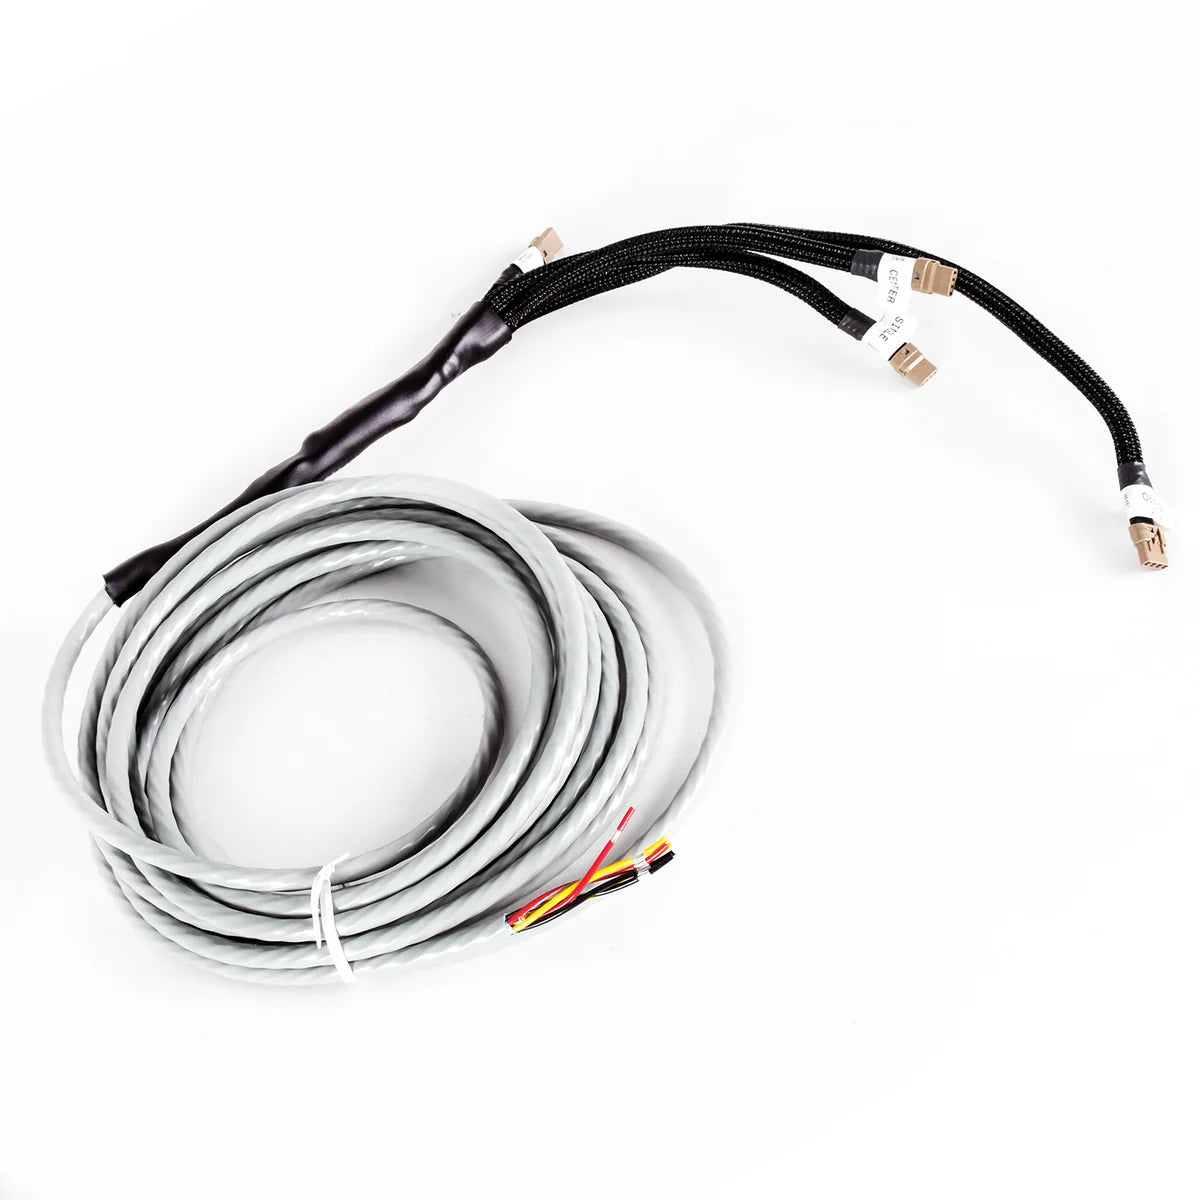 Wiring Harness for Antenna Mounts with Tomar LED Lights